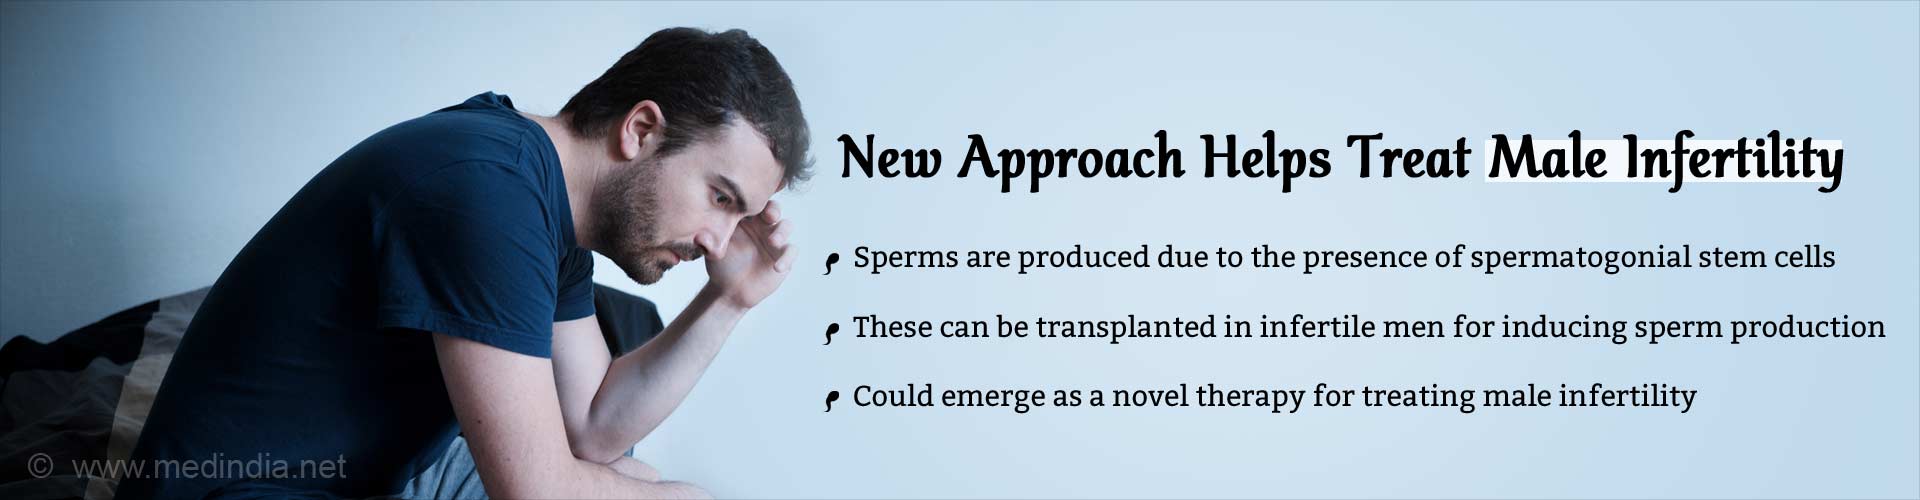 New approach helps treat male infertility. Sperms are produced due to the presence of spermatogonial stem cells. These can be transplanted in infertile men for inducing sperm production. Could emerge as a novel therapy for treating male infertility.